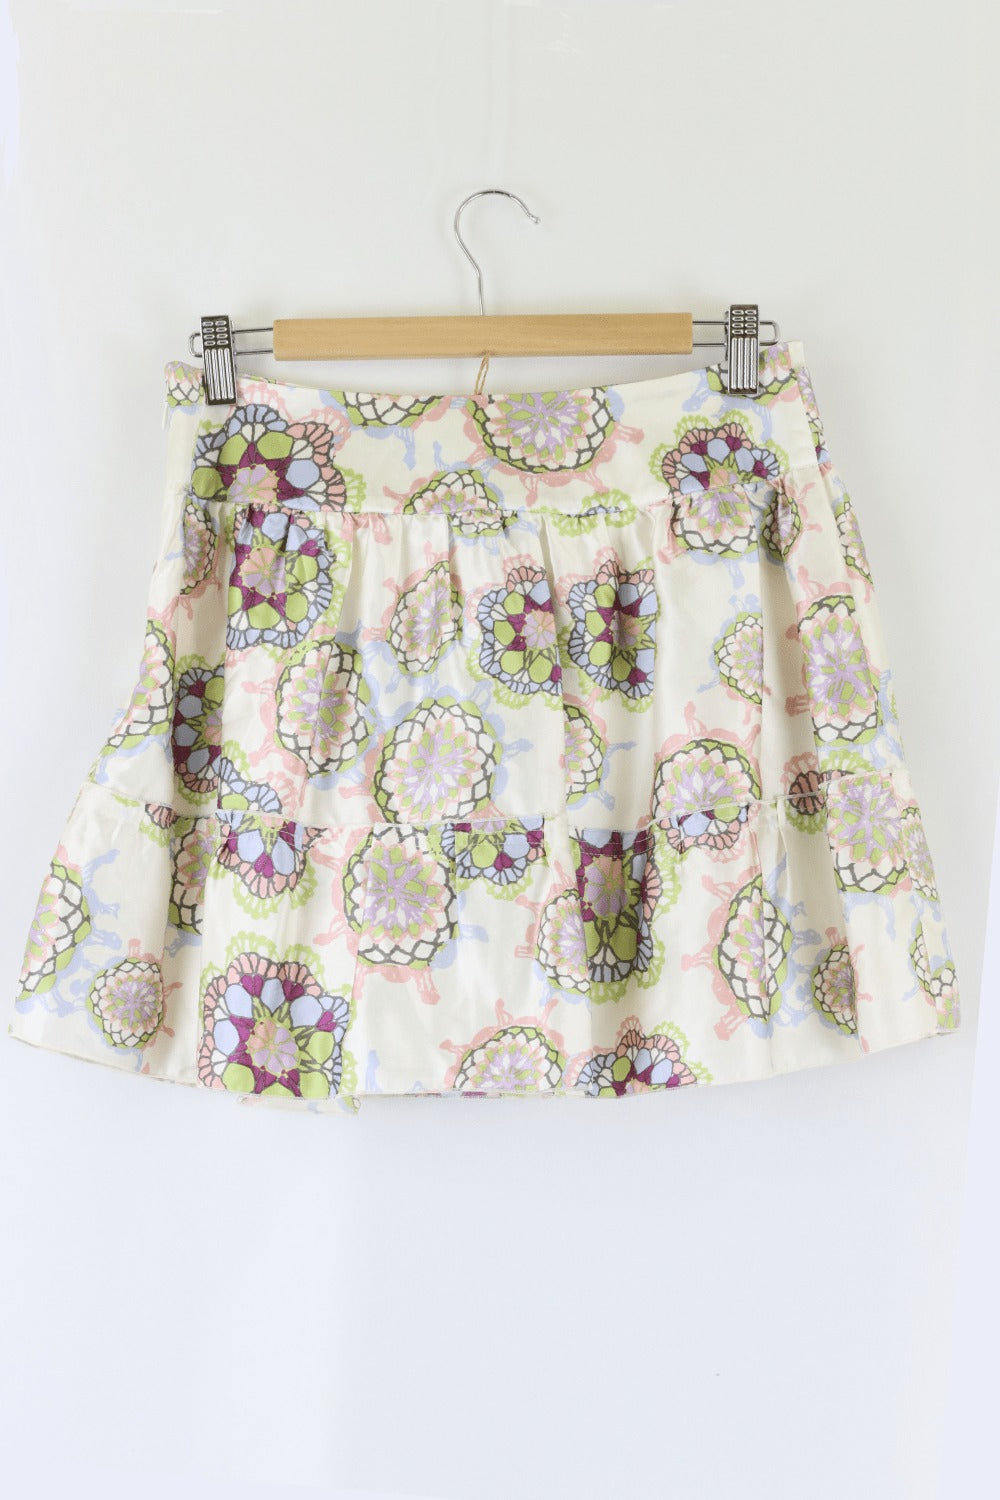 Alannah Hill Floral Skirt Green And Purple 8